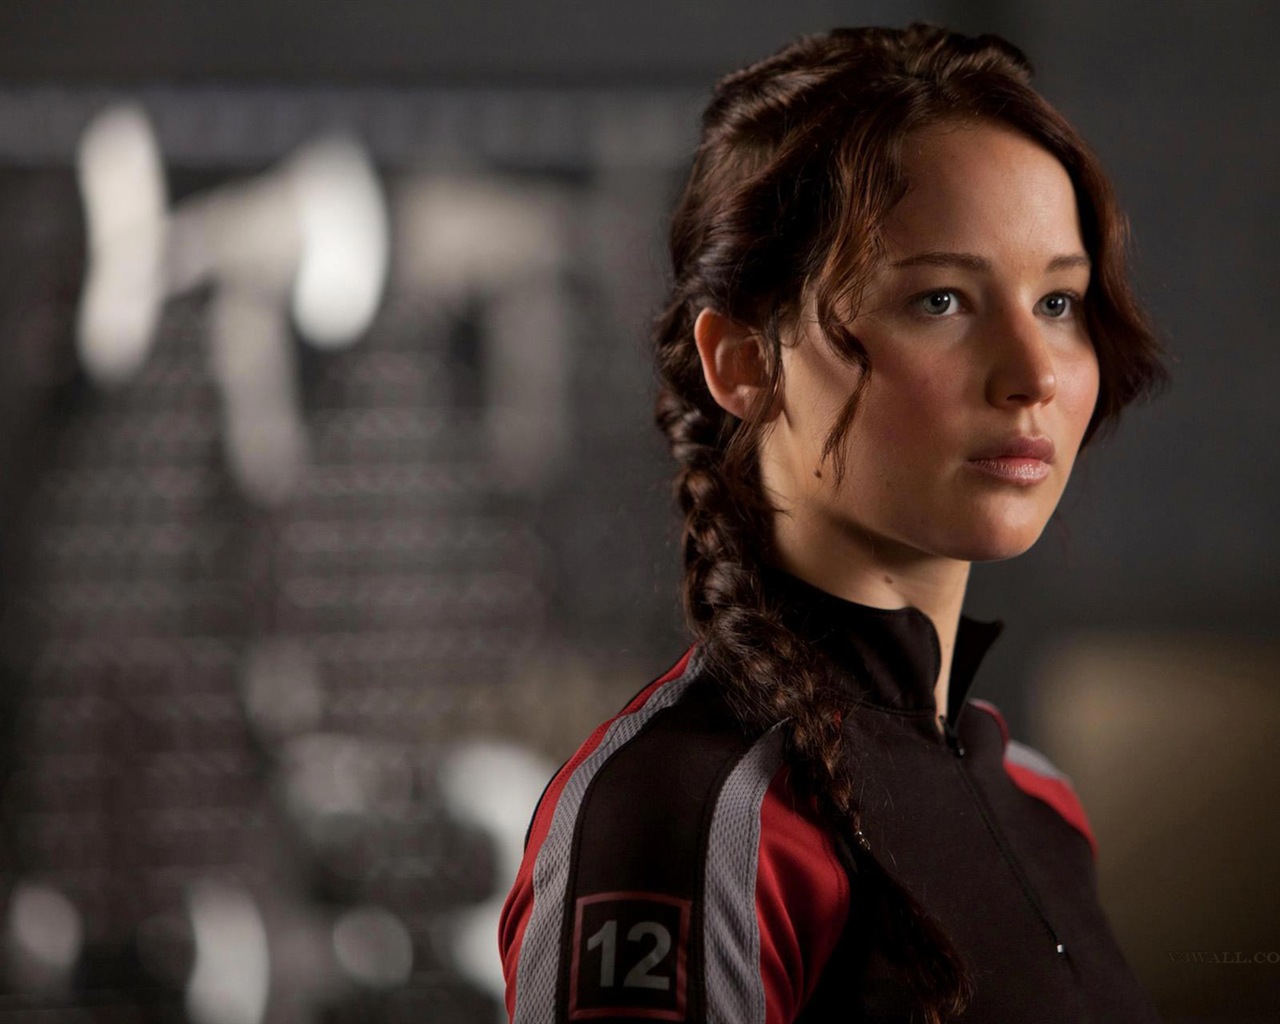 The Hunger Games: Catching Fire wallpapers HD #5 - 1280x1024